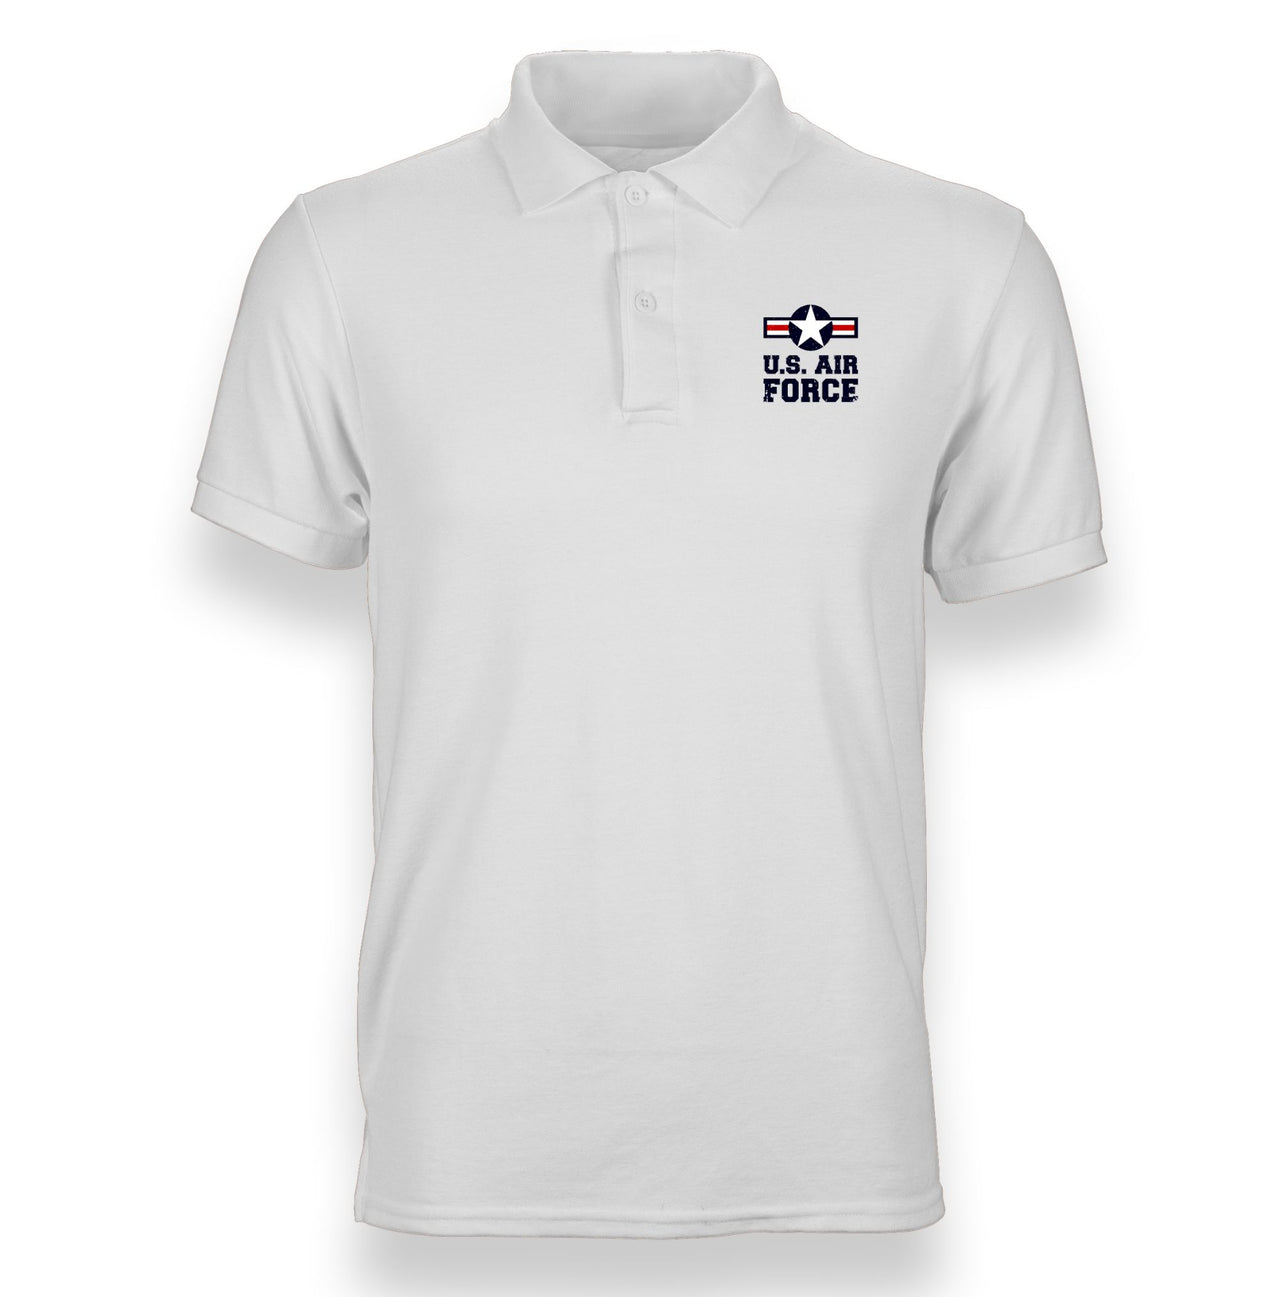 US Air Force Designed "WOMEN" Polo T-Shirts